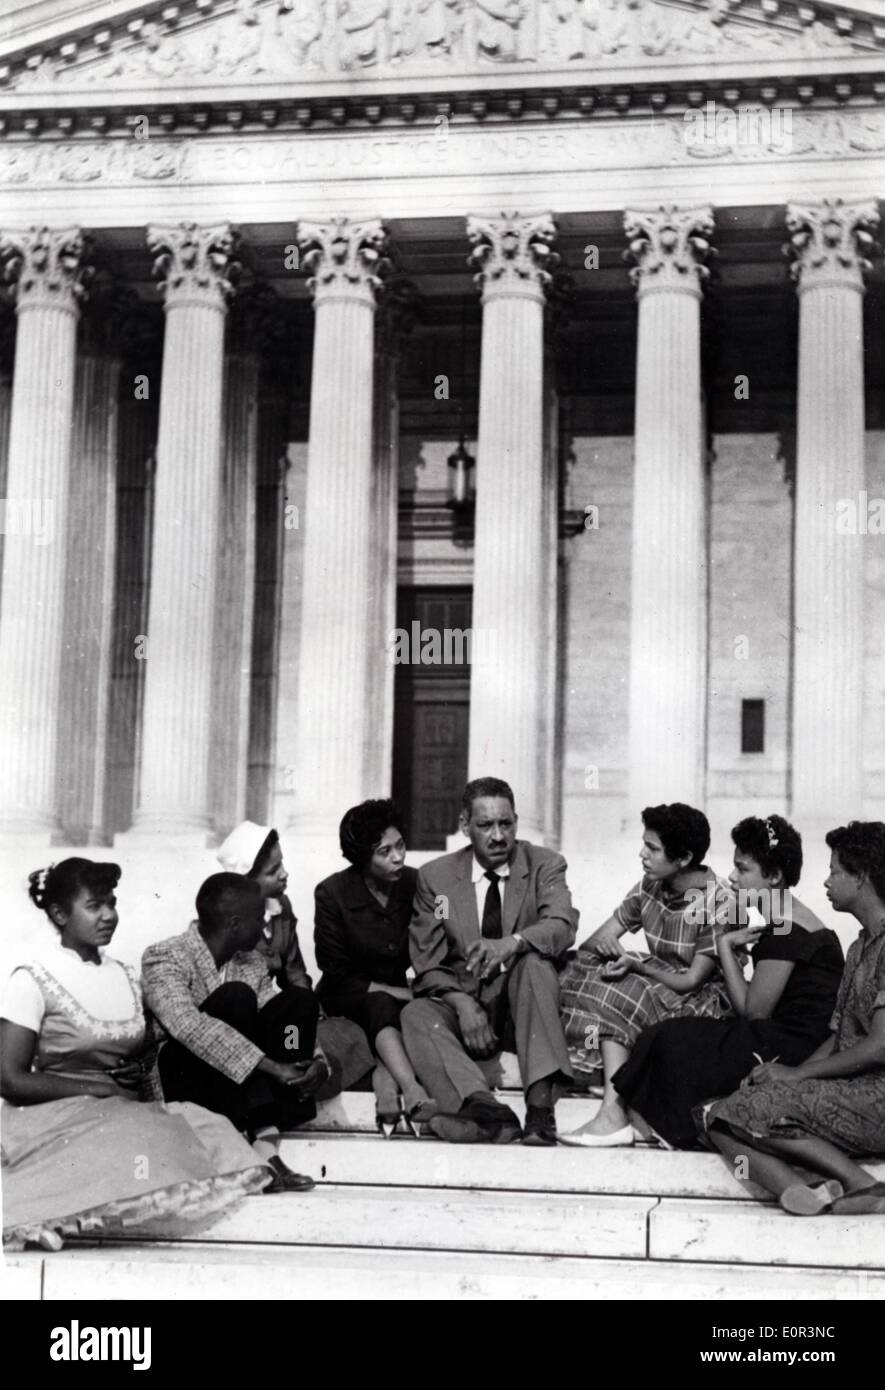 Jan. 01, 1958 - Washington, District of Columbia, U.S. - File Photo: circa 1958. alf a century after the historic ruling in Brown v. Board of Education that overturned segregation in education, the US is marking 50 years of racial school integration. After the 1954 Brown school-desegregation decision, Little Rock school board officials decided to begin desegregation of Central High School in September 1957. THURGOOD MARSHALL (C), sits on the high court steps with students from Little Rock, Arkansas, after appealing 1958 court order to delay integration at their school. He won the appeal. Stock Photo